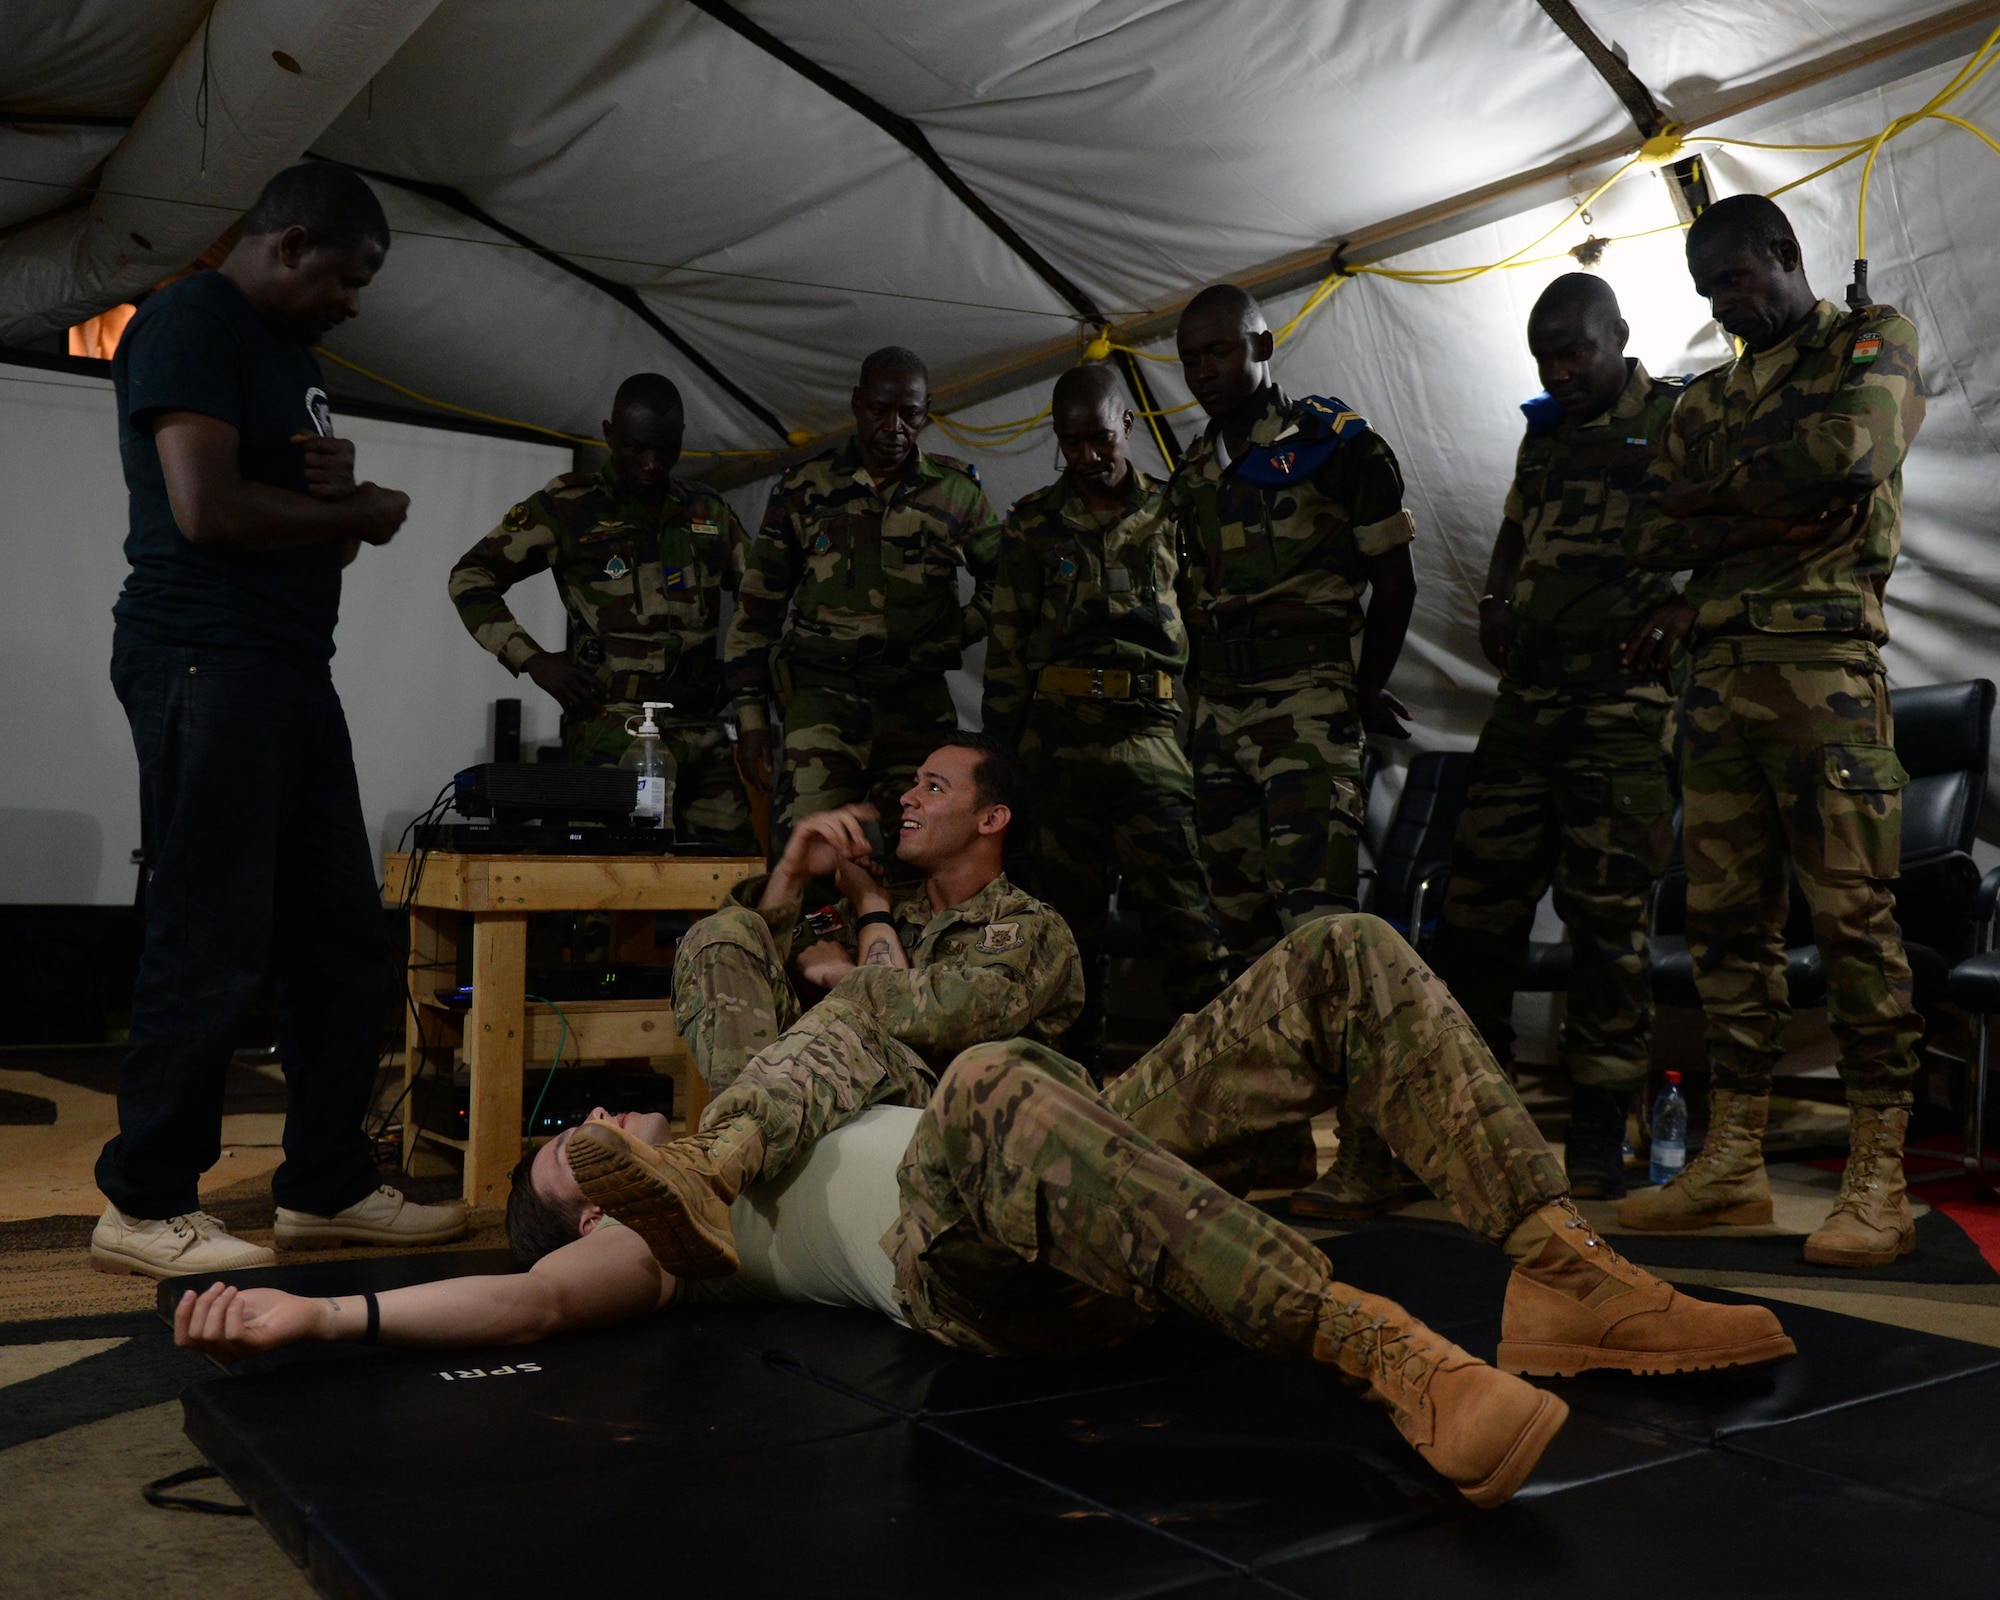 Members of the Forces Armées Nigeriennes watch as Senior Airman Joshua Brooks, 768th Expeditionary Air Base Squadron air advisor, demonstrates an armbar at Nigerien Air Base 101, Niger, April 4, 2017. The training was part of a larger joint knowledge exchange to help train and build relations with the FAN. (U.S. Air Force photo by Senior Airman Jimmie D. Pike)